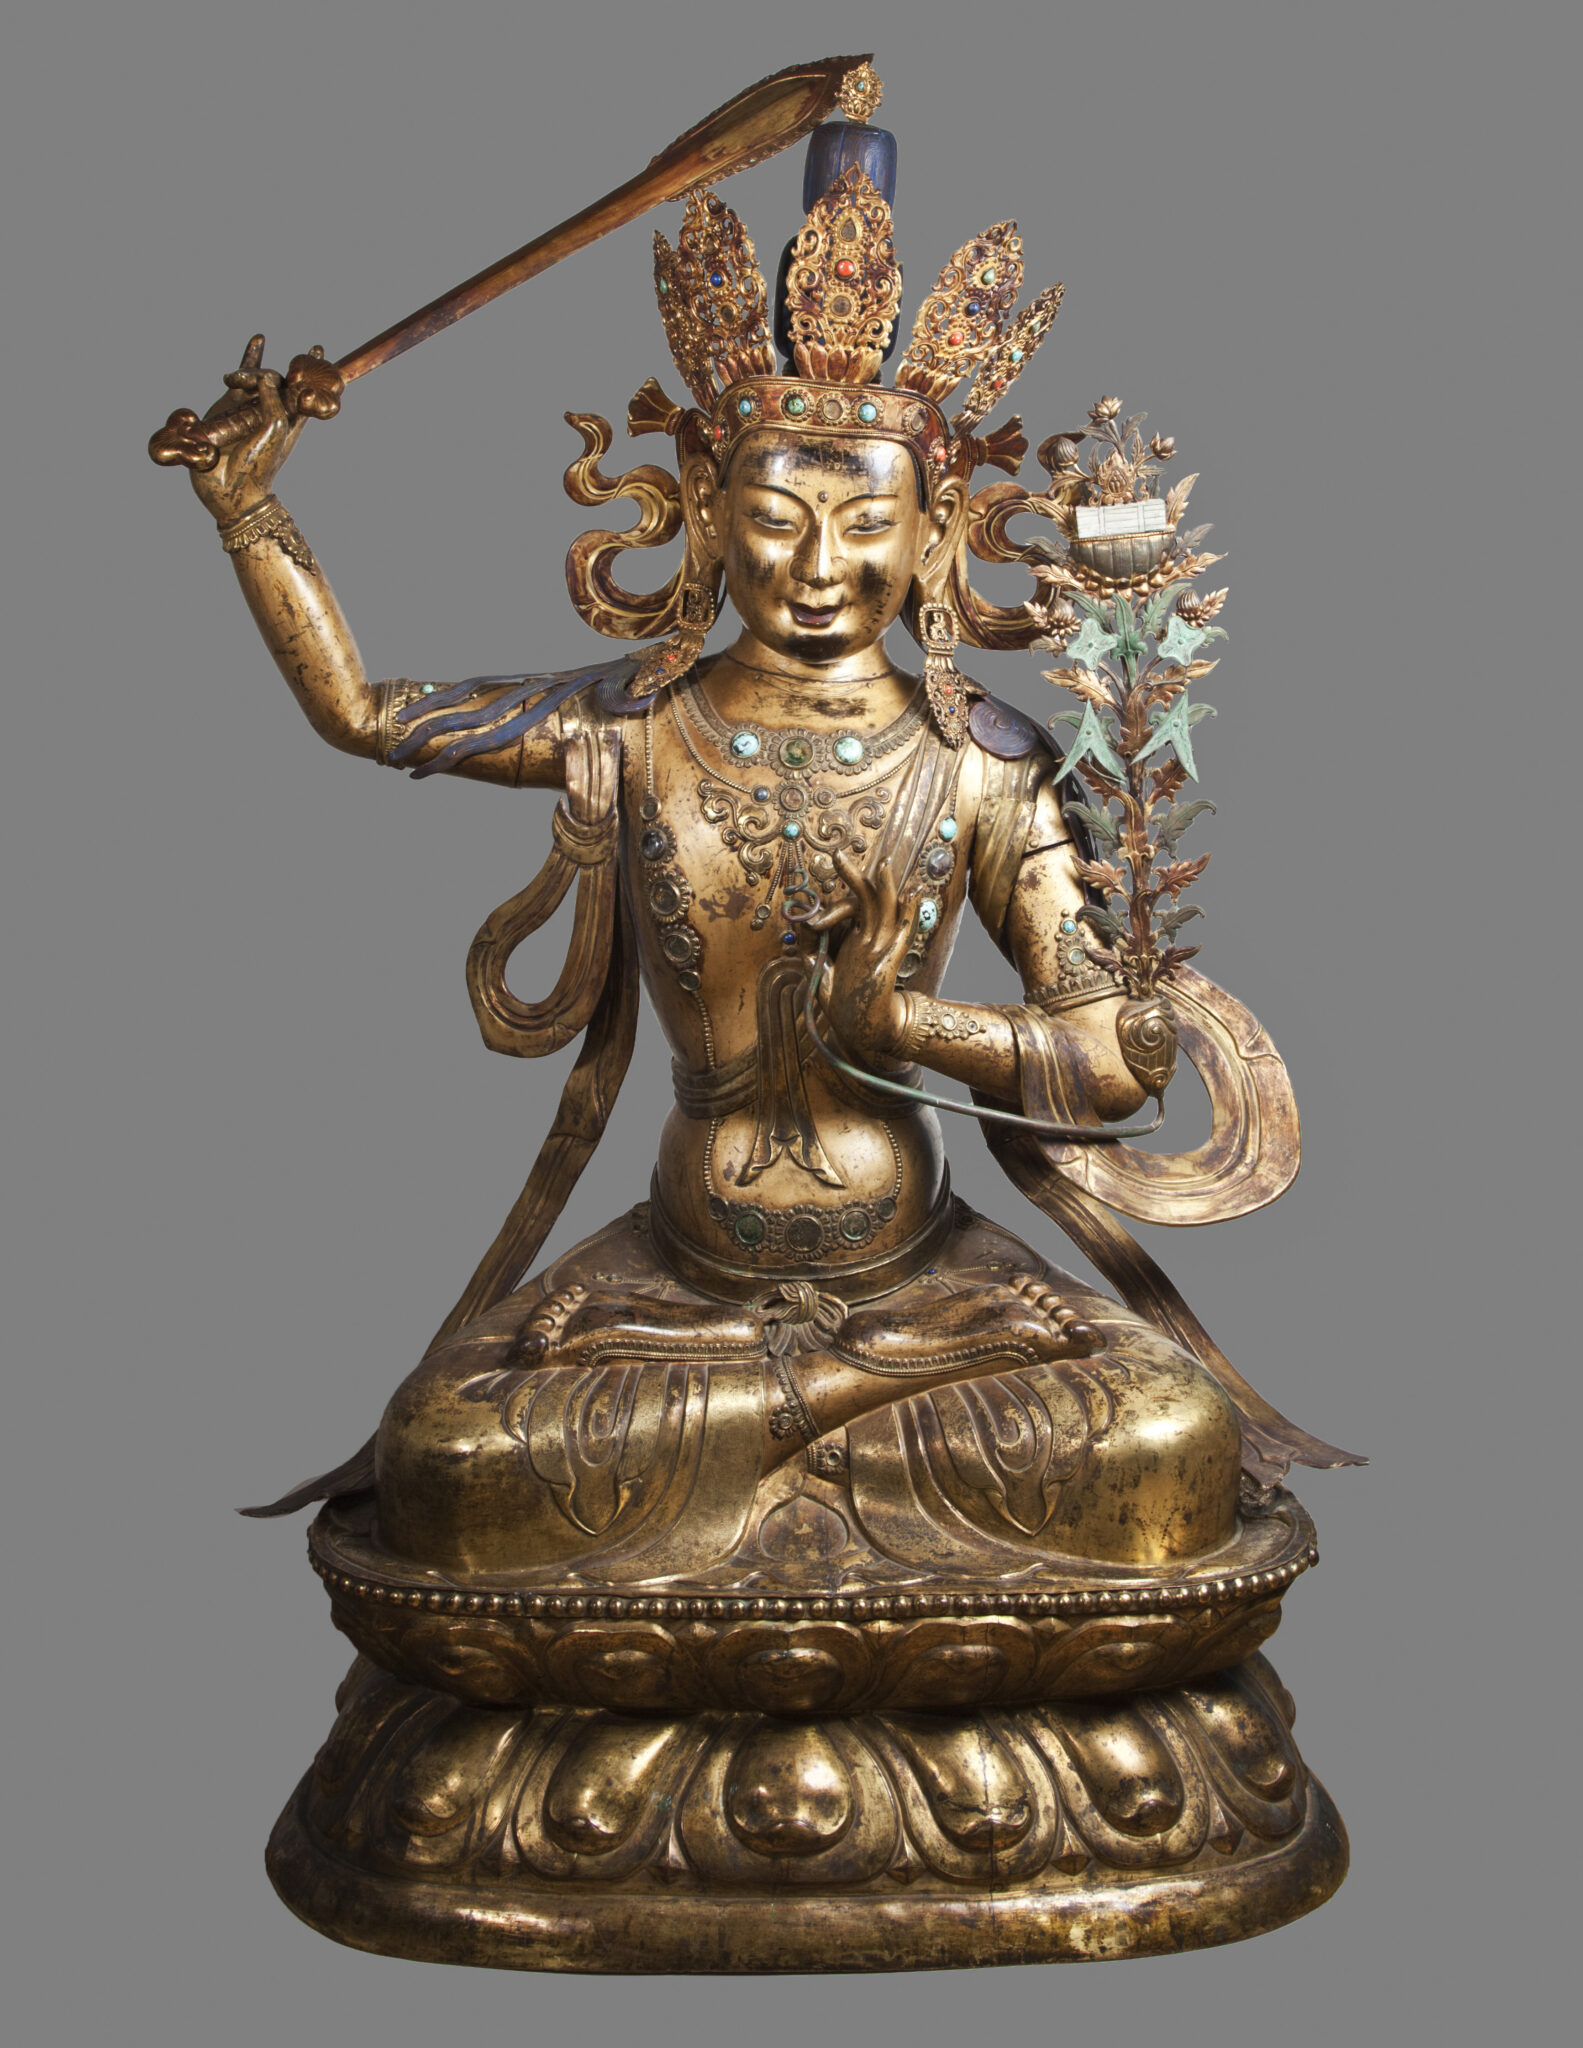 Copper-colored statue depicting Bodhisattva raising sword with left arm, long-stemmed blossom at right shoulder